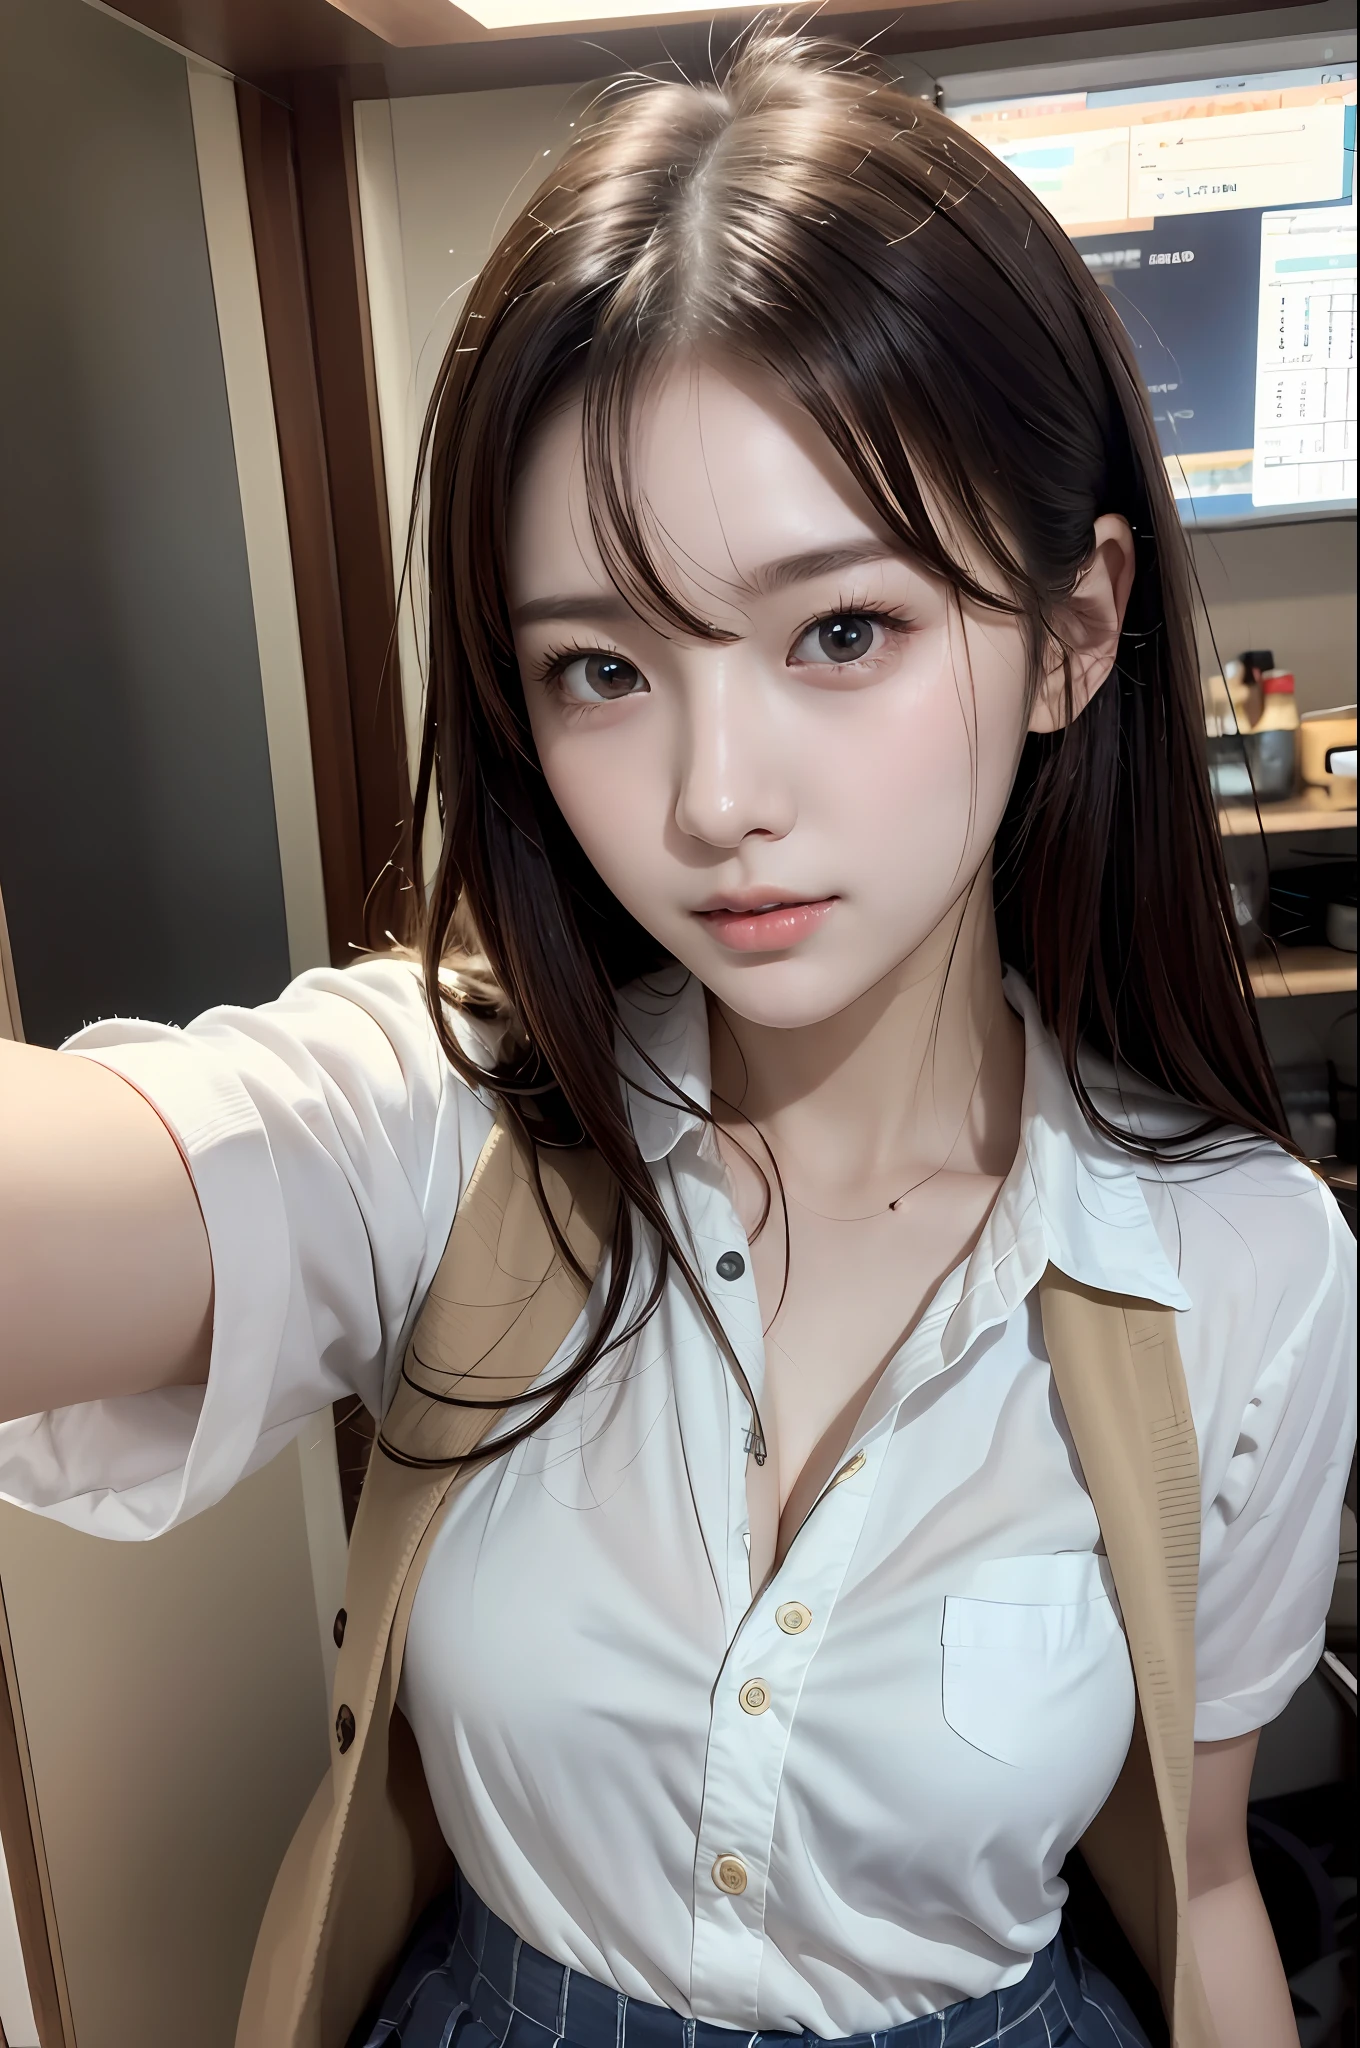 clothed、(photo real:1.4)、(Hyperrealistic:1.4)、(Realstic:1.3)、
(Smoother lighting:1.05)、(Improved lighting quality in movies:0.9)、32 k、
1GIRL、20 years old girl、Realistic Lighting、Backlit、Facial light、Ray Trace、(Brightening light:1.2)、(Increase quality:1.4)、
(Top Quality Real Texture Skin)、Fine eyes、finerly detailed face、
(Tired, sleepy and satisfied:0.0)、closeup on face、Student uniform:1.3、korean idol、Nogizaka Idol、hposing Gravure Idol
(Bodyline mood improvement:1.1)、Glossy skin、korean idol、Nogizaka Idol、hposing Gravure Idol、selfie